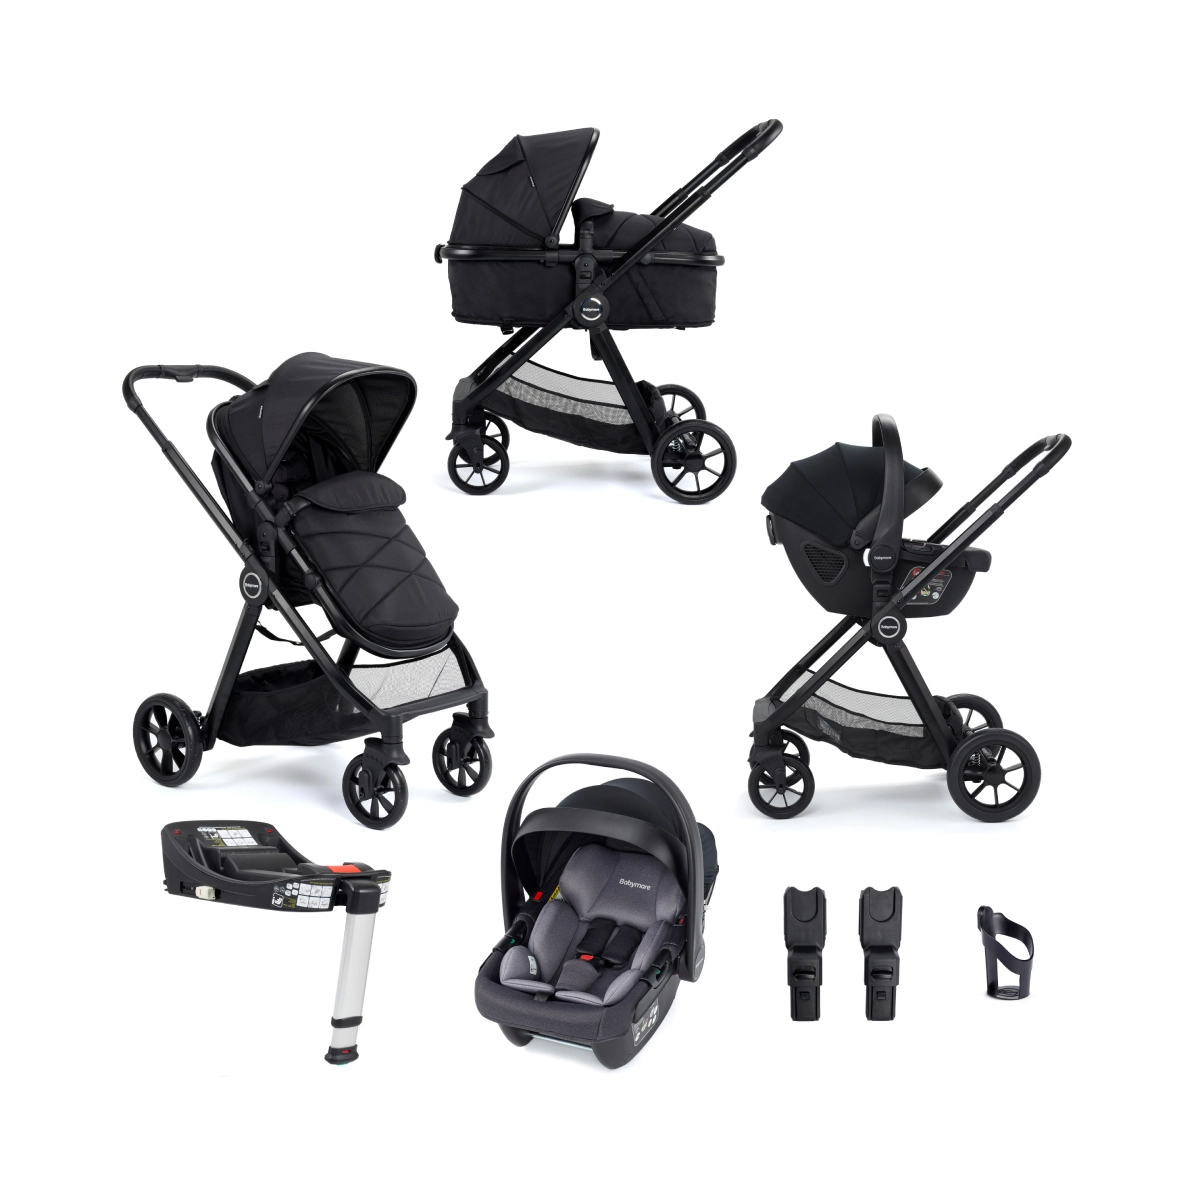 Babymore Mimi 3 in 1 Travel System Bundle with Coco i-Size Car Seat with Isofix Base